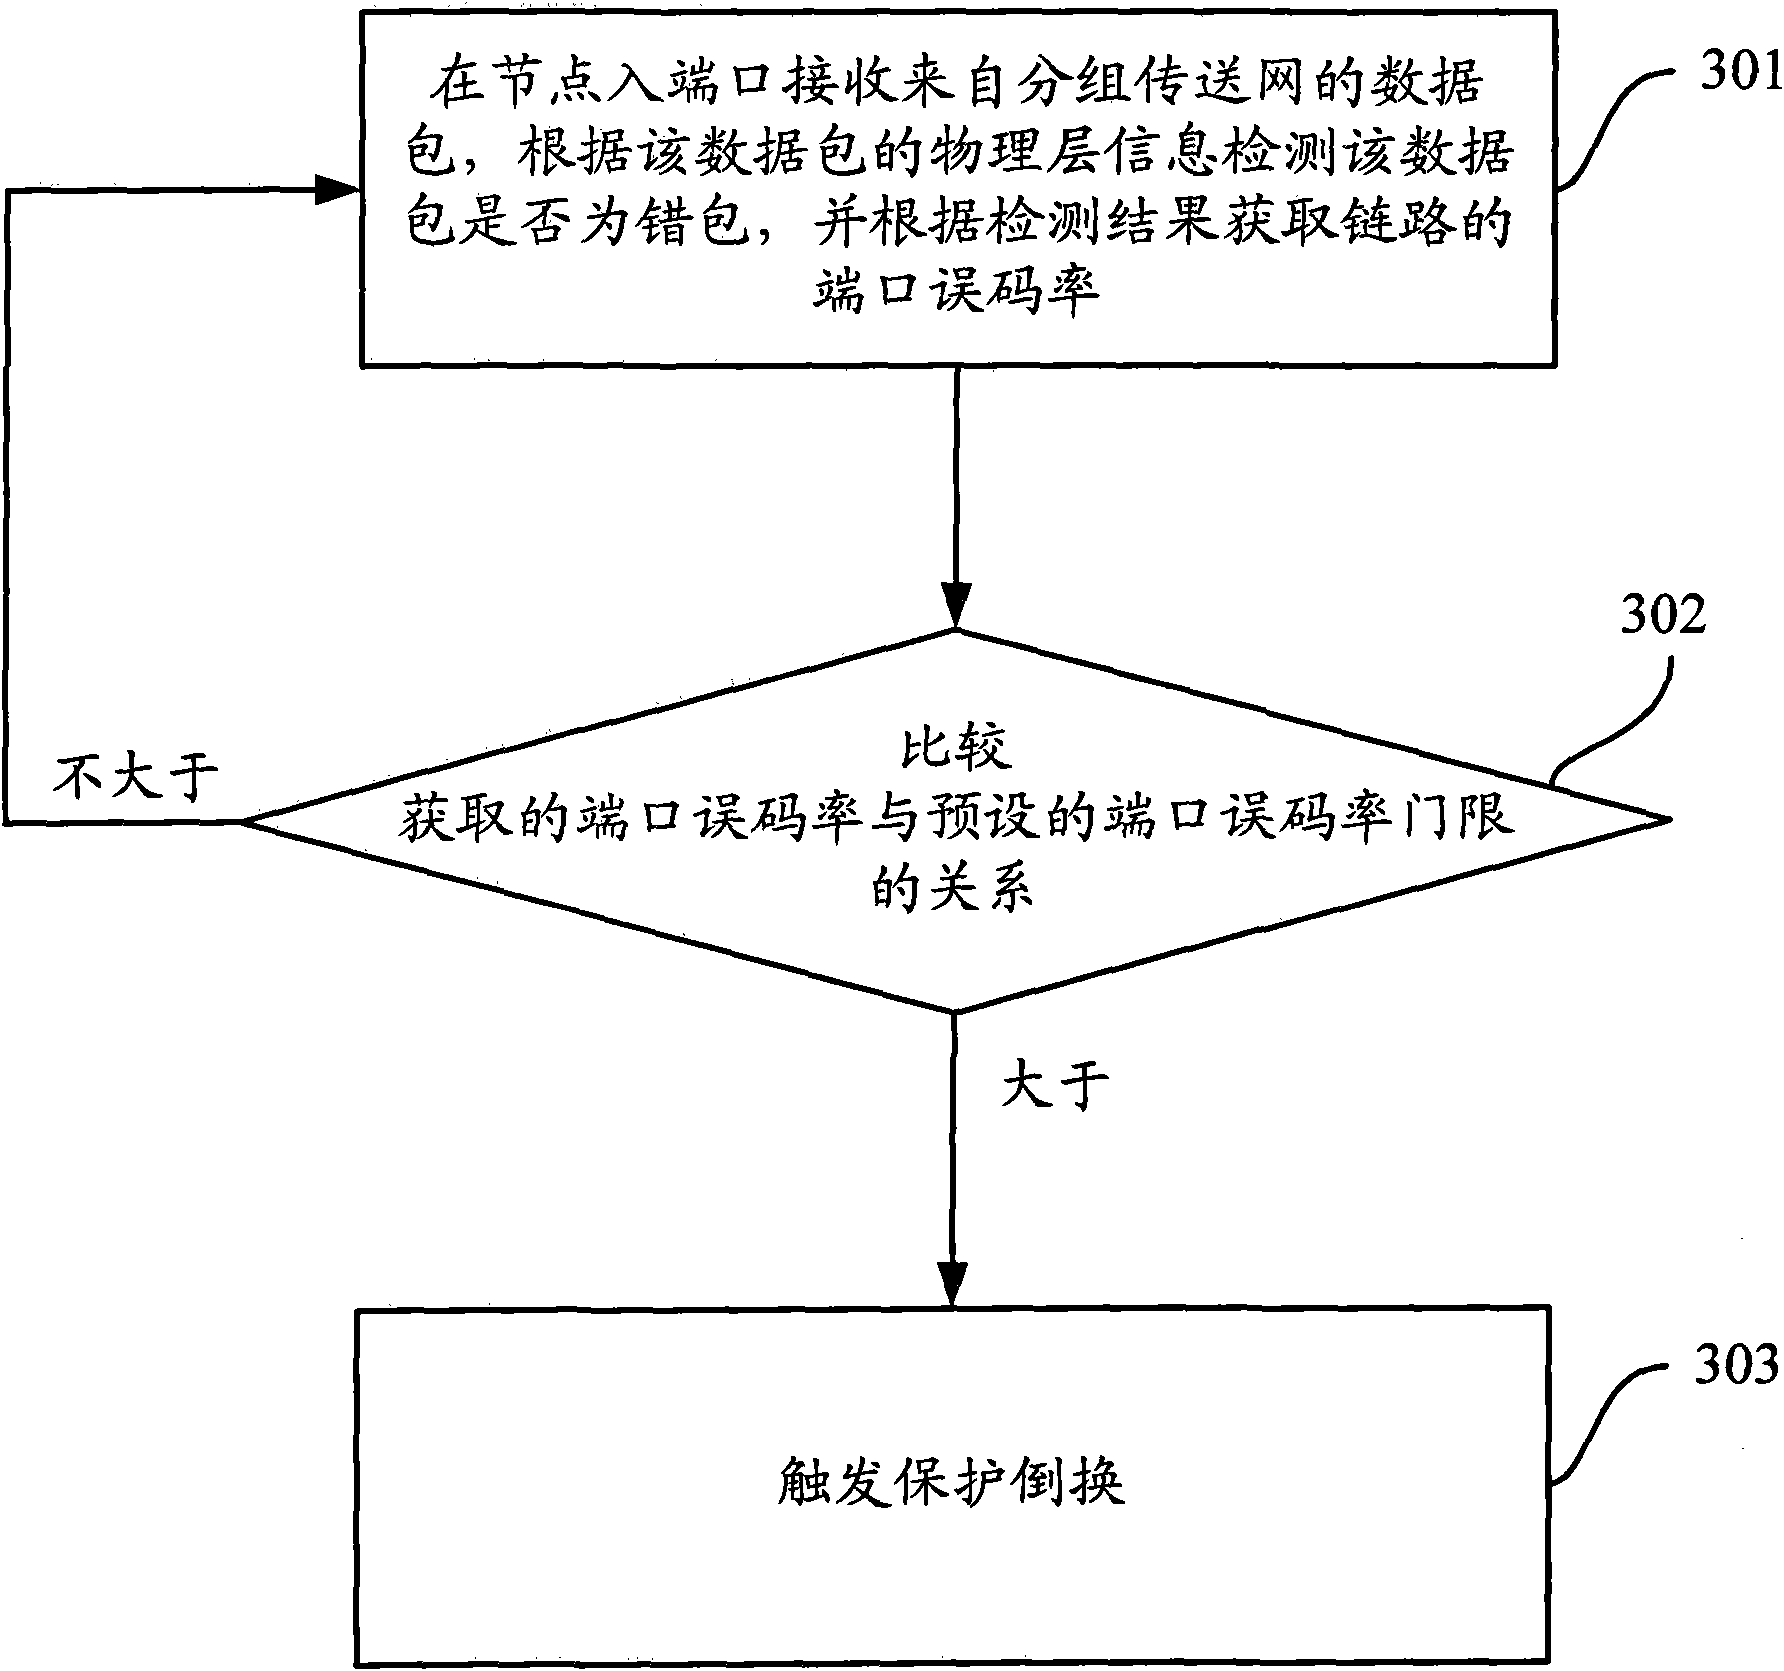 Method, device and system for protection switching of packet transport network